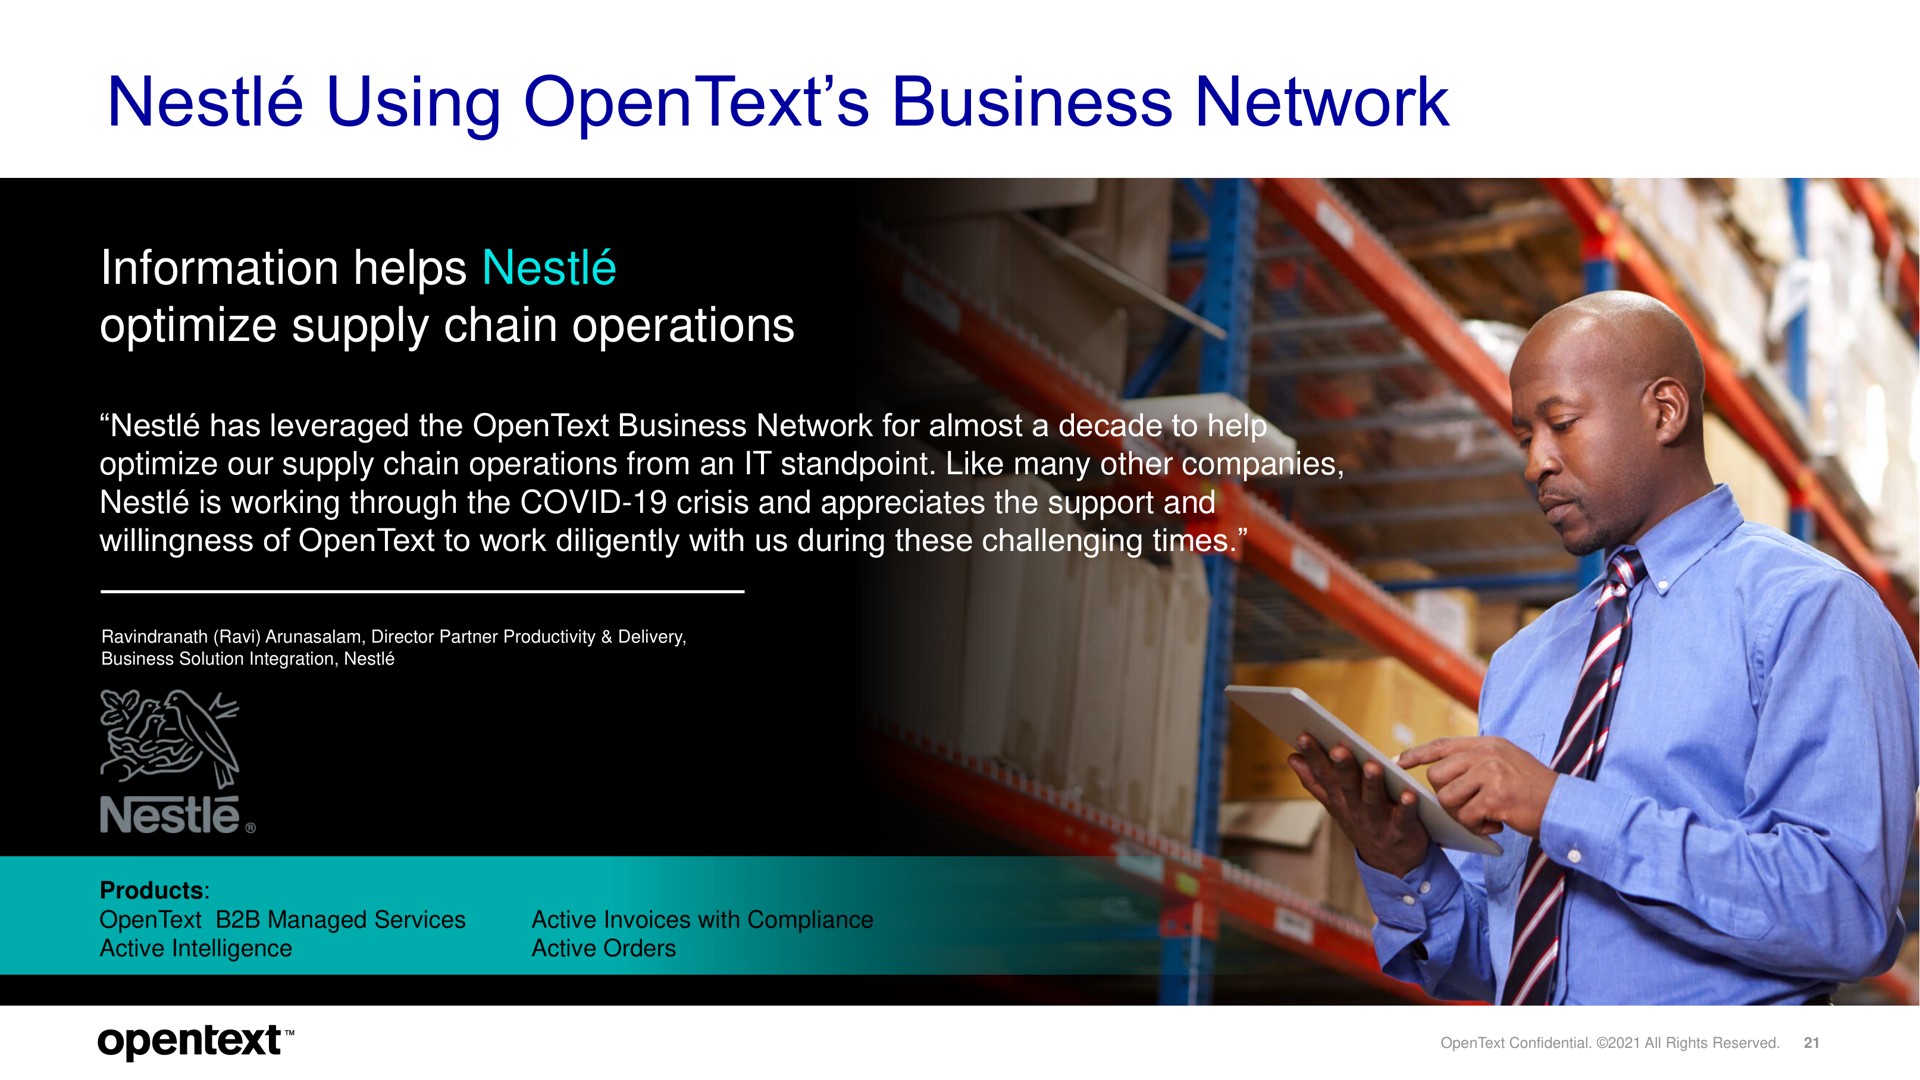 using business network information helps optimize supply chain operations nestle nestle | OpenText